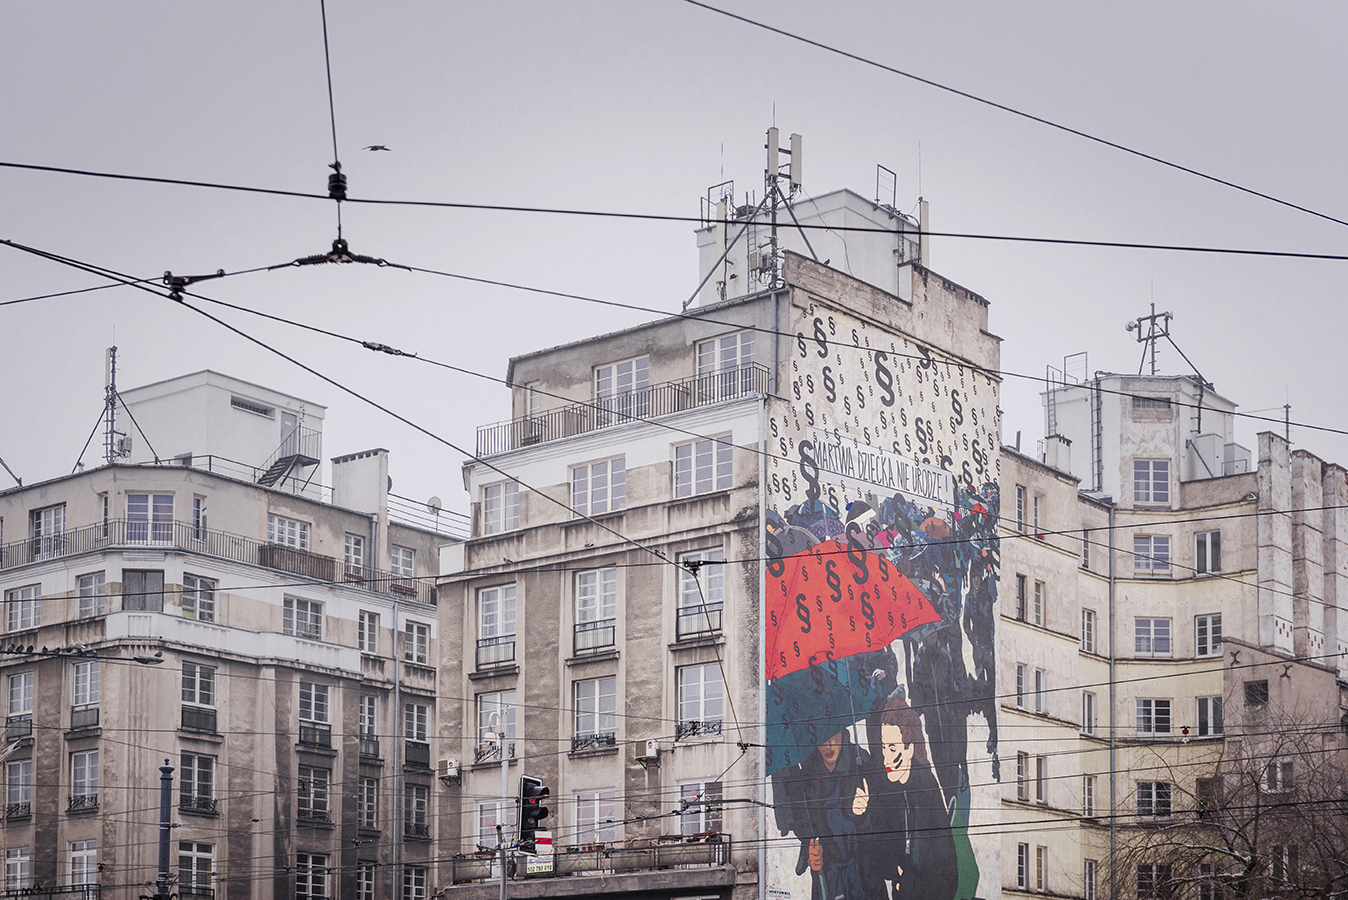  A street art painting designed by Marta Frej, a socially engaged illustrator, was painted in the centre of Warsaw to commemorate the Black Monday marches held in October 2016. More than 100,000 people protested against the tightening up of the anti-